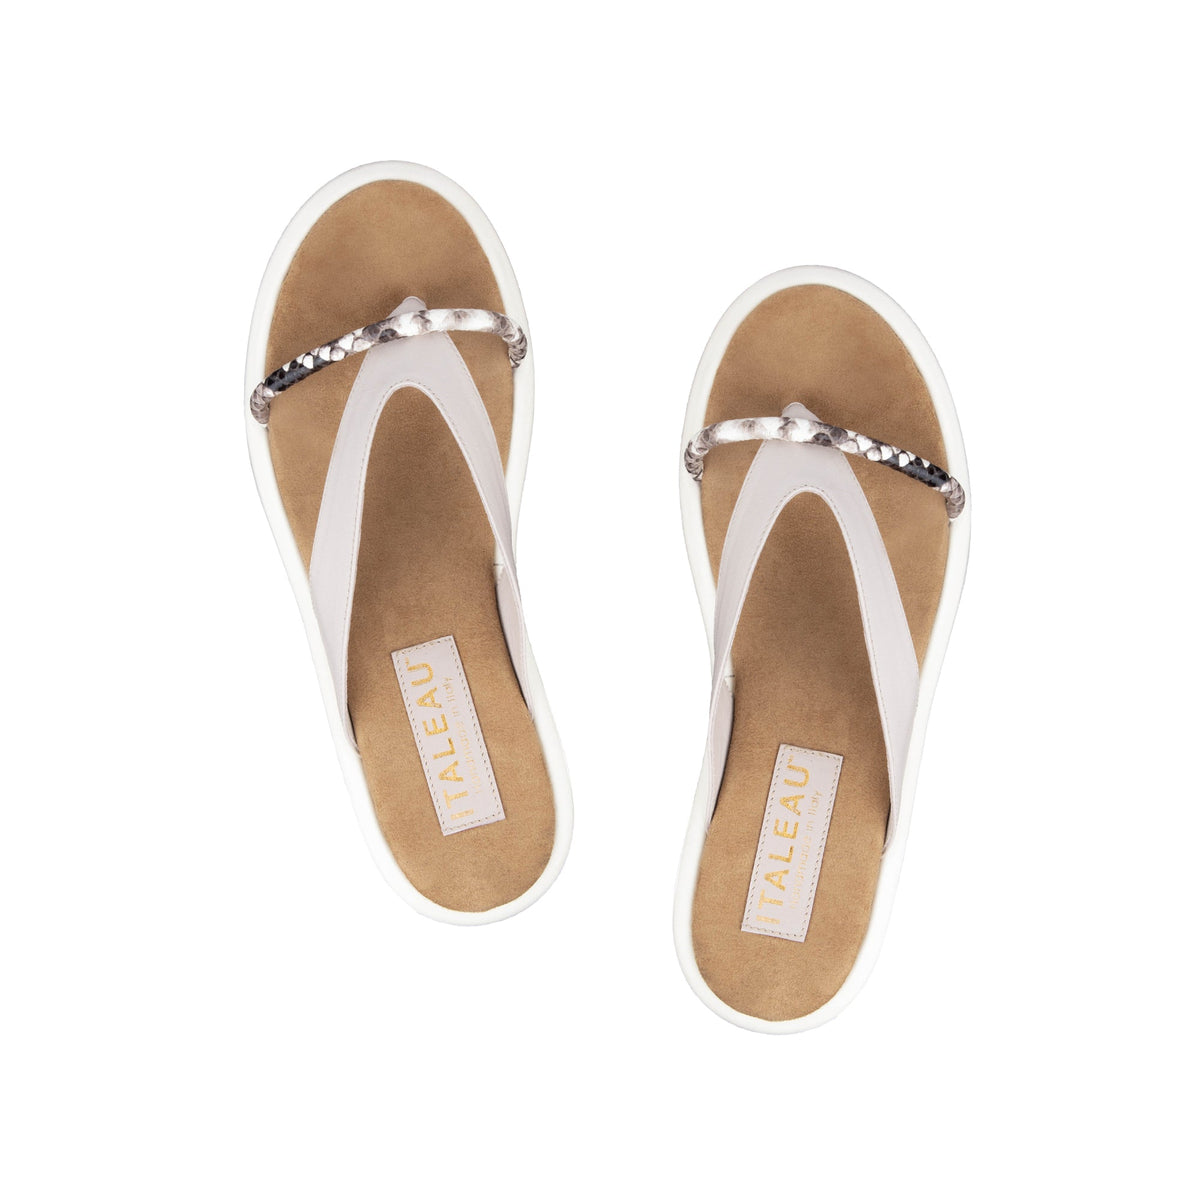 Italeau Zabri sandals are comfortable, versatile and handmade in Italy